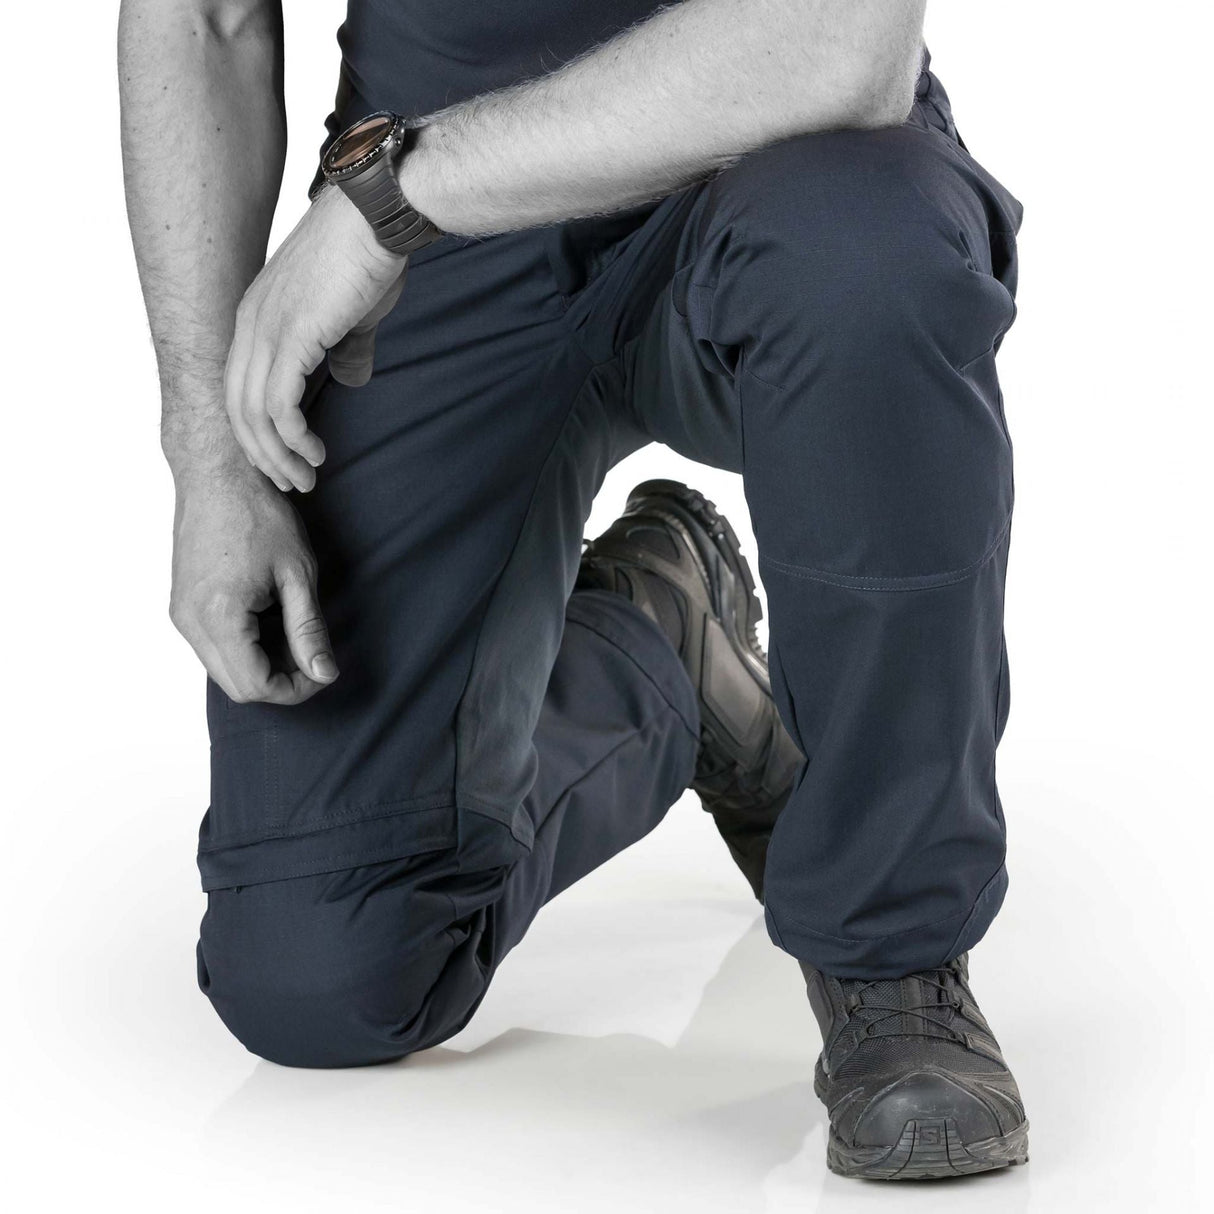 Upgrade your tactical gear with P-40 Classic Gen.2 Tactical Pants. Features doubled belt loops and Schoeller®-dynamic stretch material for durability.